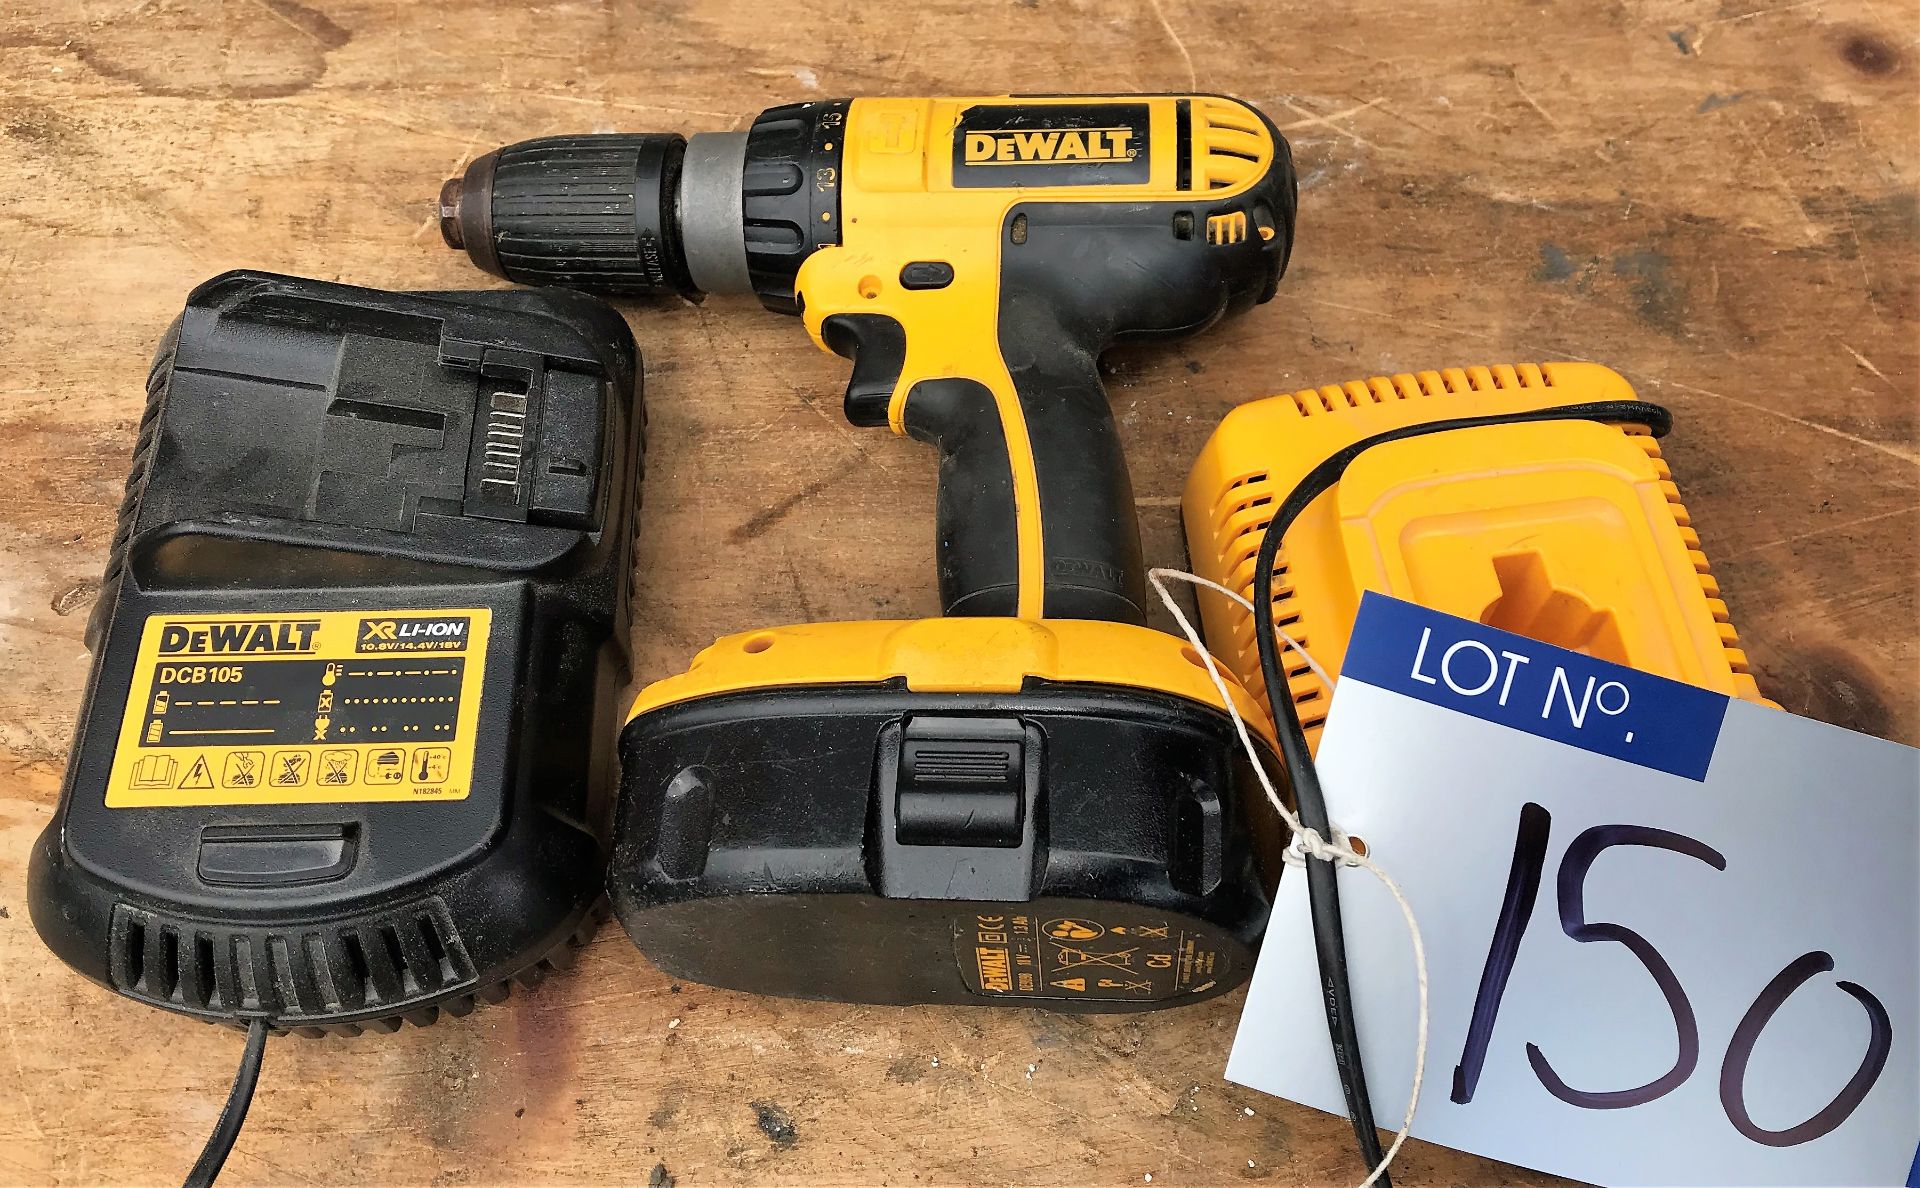 A DeWalt DC725 Cordless Drill with 2 Chargers-loca